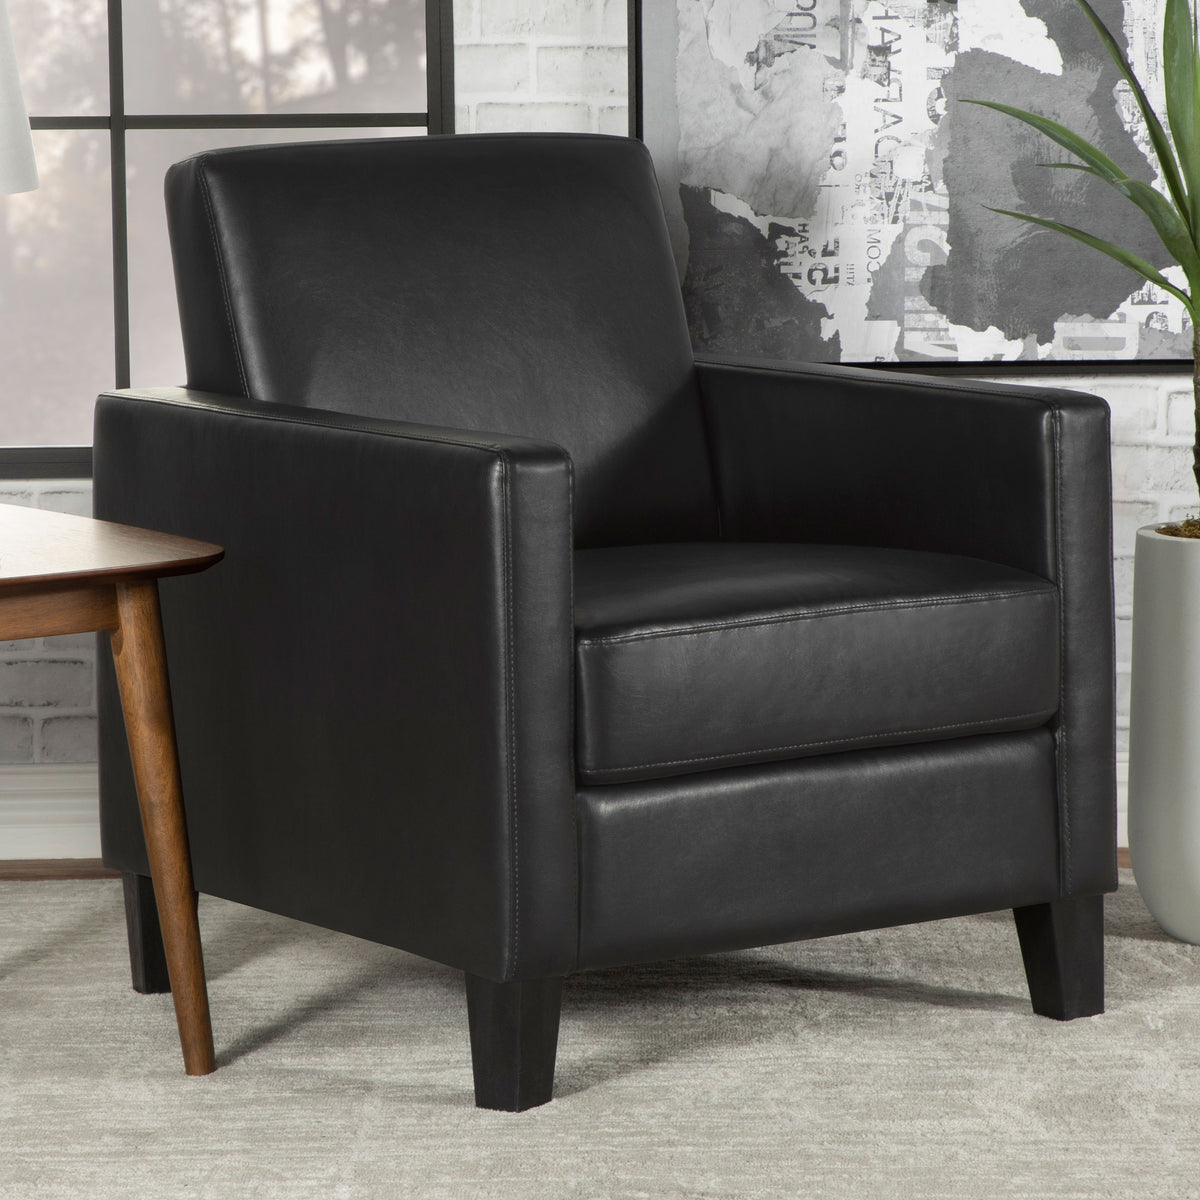 Julio Upholstered Accent Chair with Track Arms Black Julio Upholstered Accent Chair with Track Arms Black Half Price Furniture